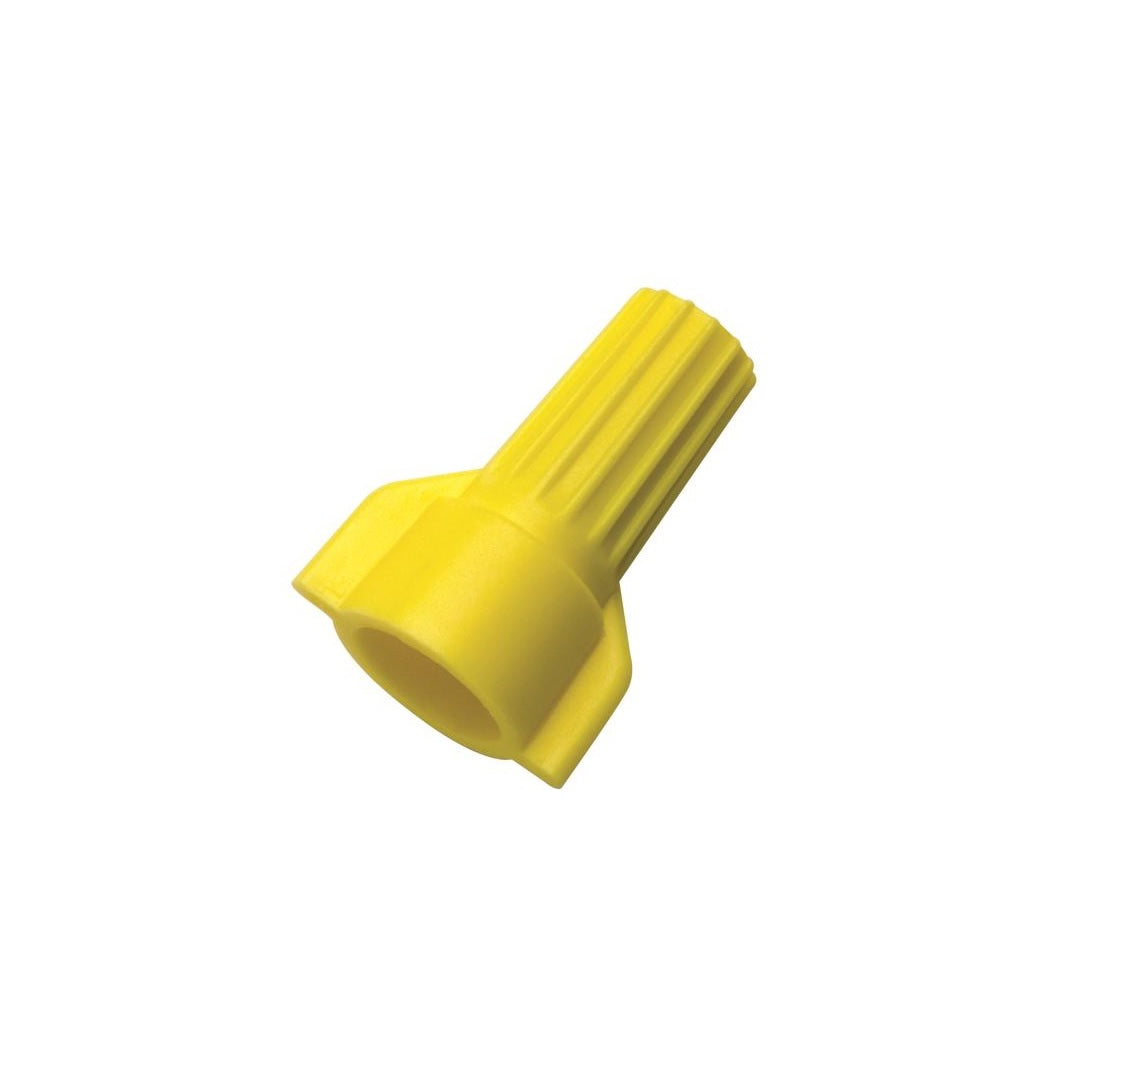 Ideal 773306 Copper Wire Connectors, Yellow